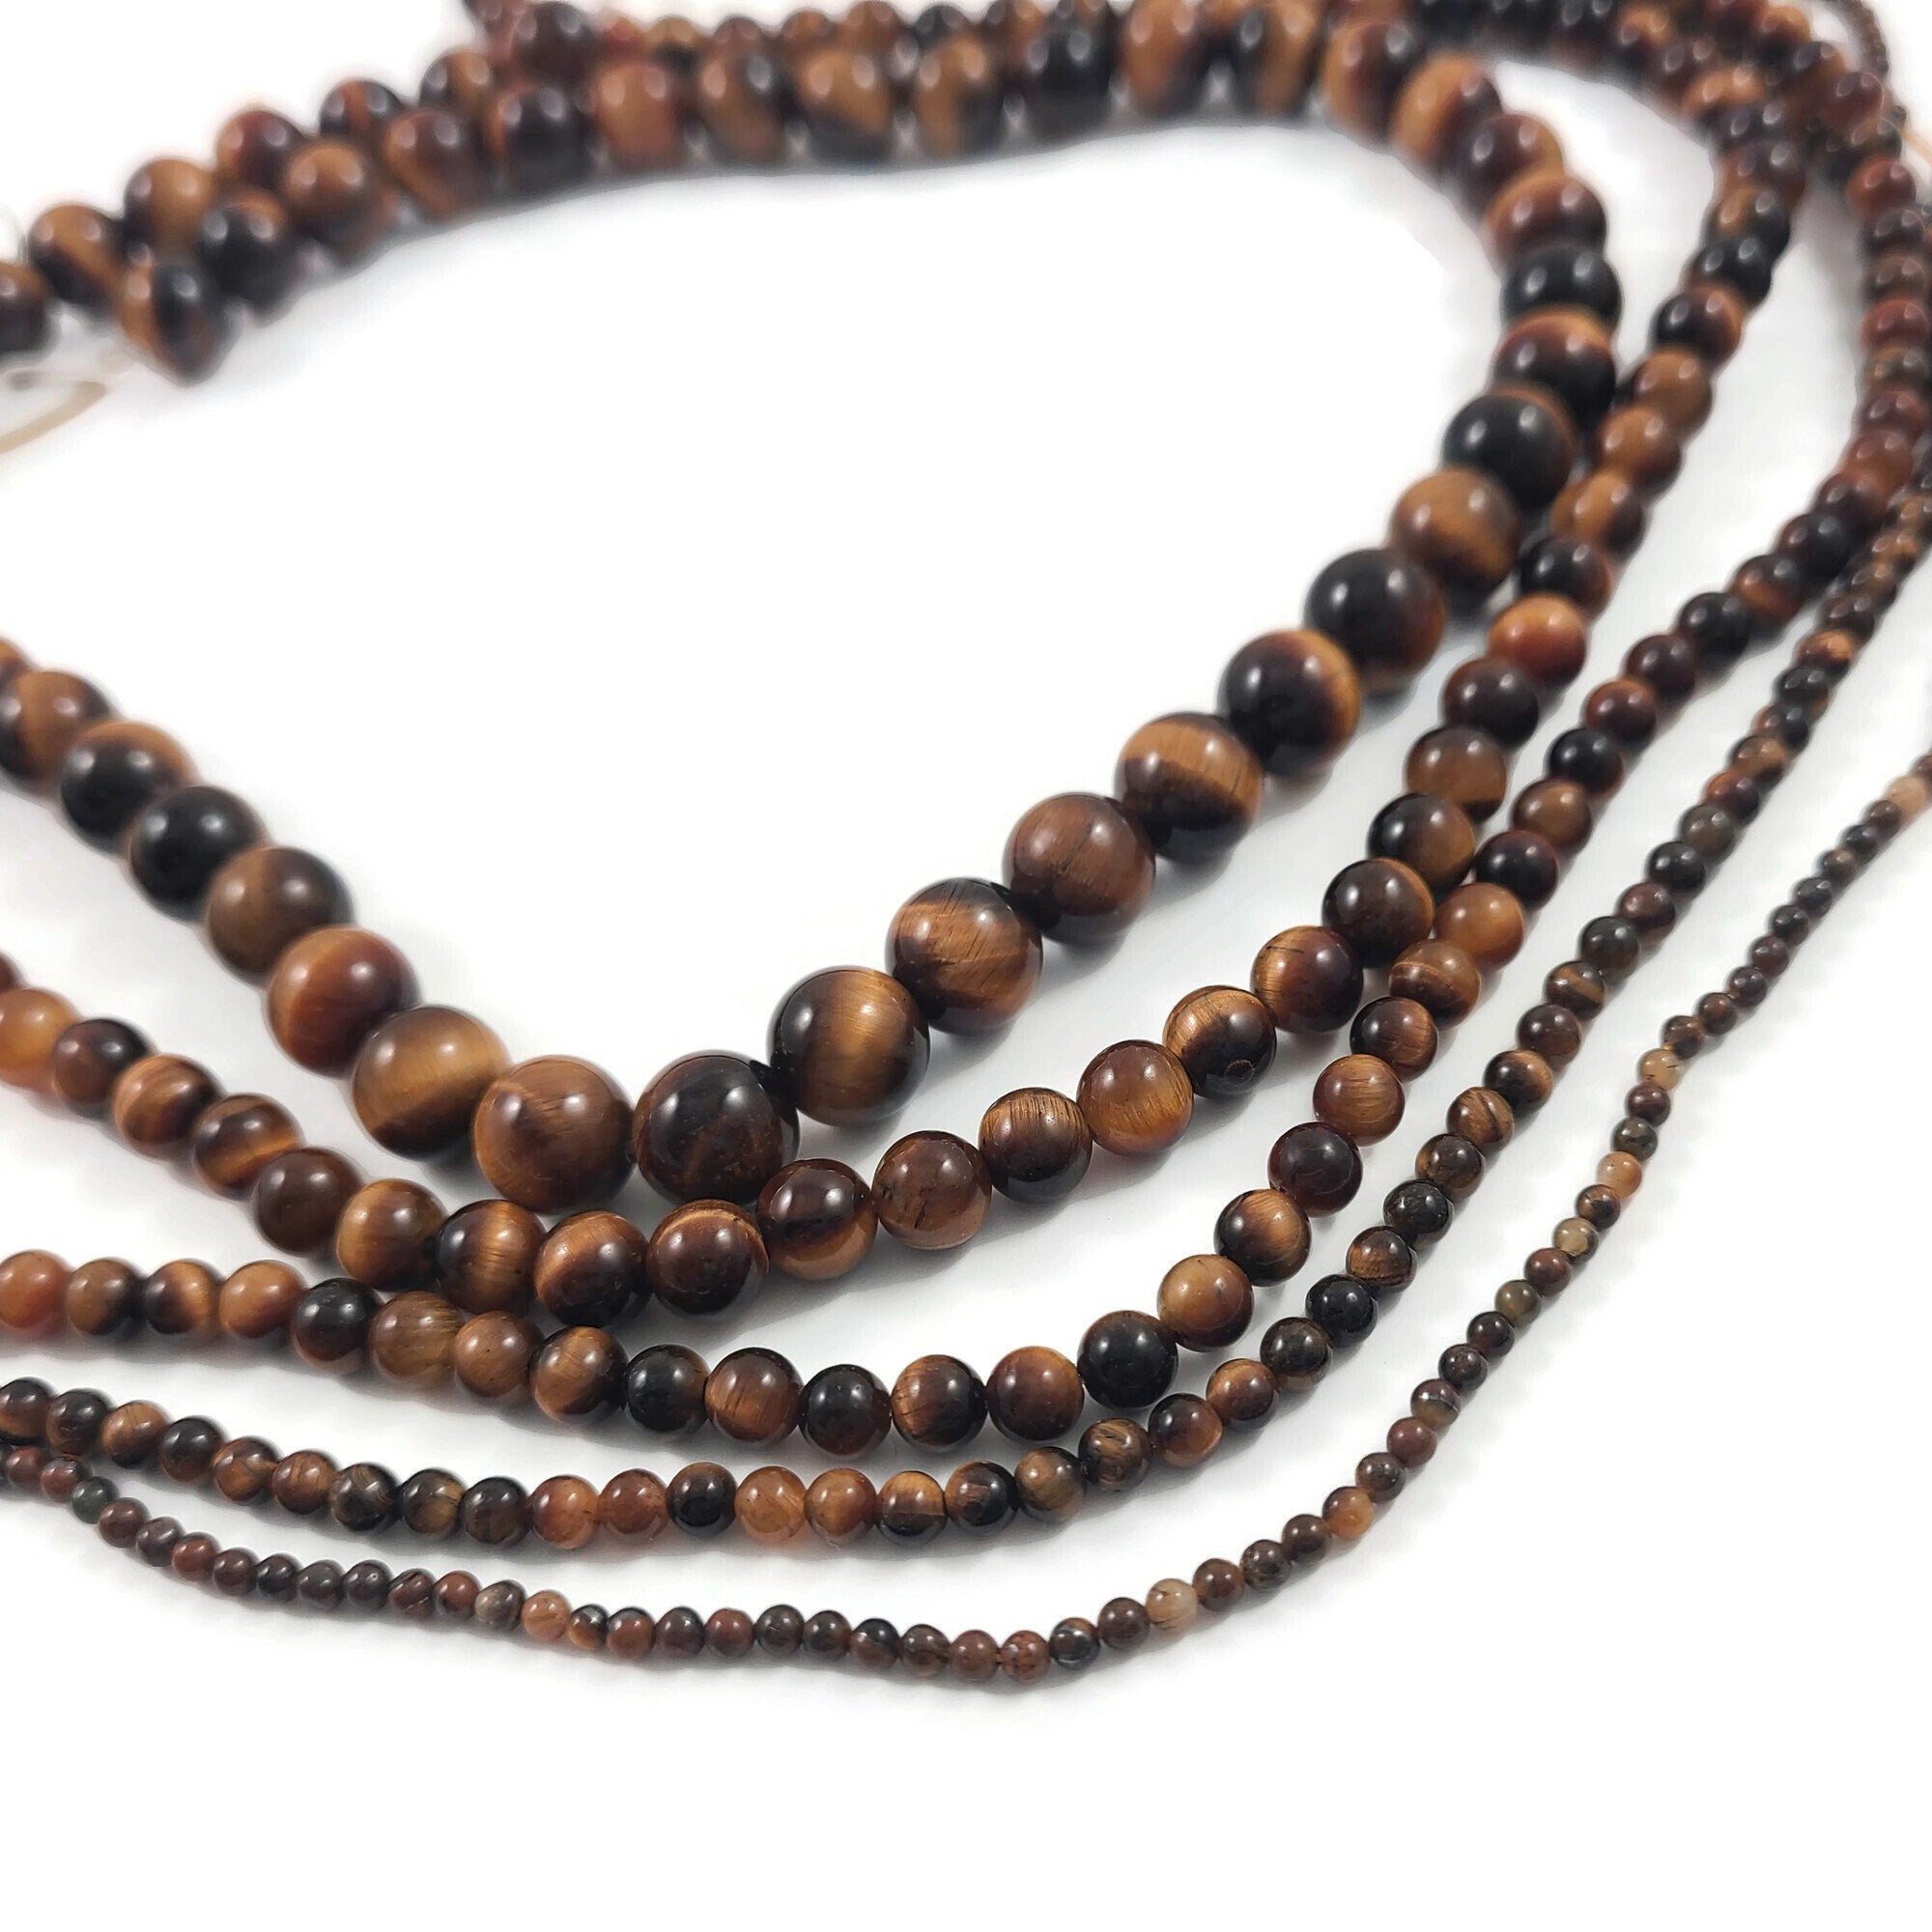 Sweet Little Tiny Tiger Eye Round Beads 4mm / Tigers Eye Gemstone Beads  Small Order Beads 